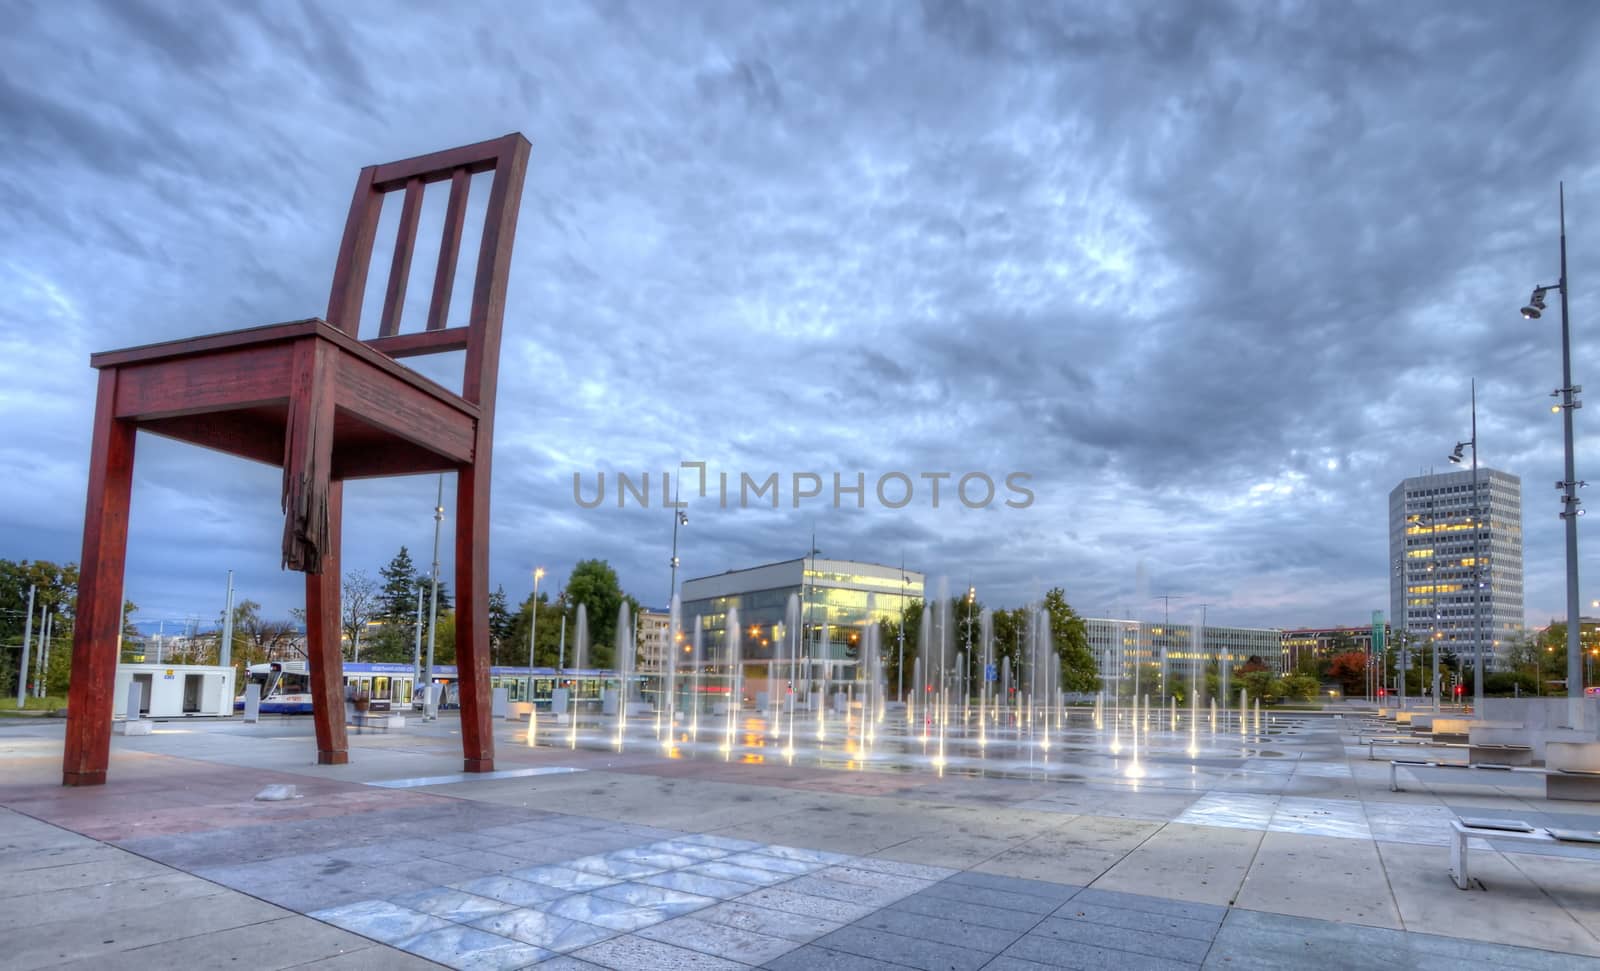 United-Nations place with its famous broken chair and fountains, Geneva, Switzerland, HDR